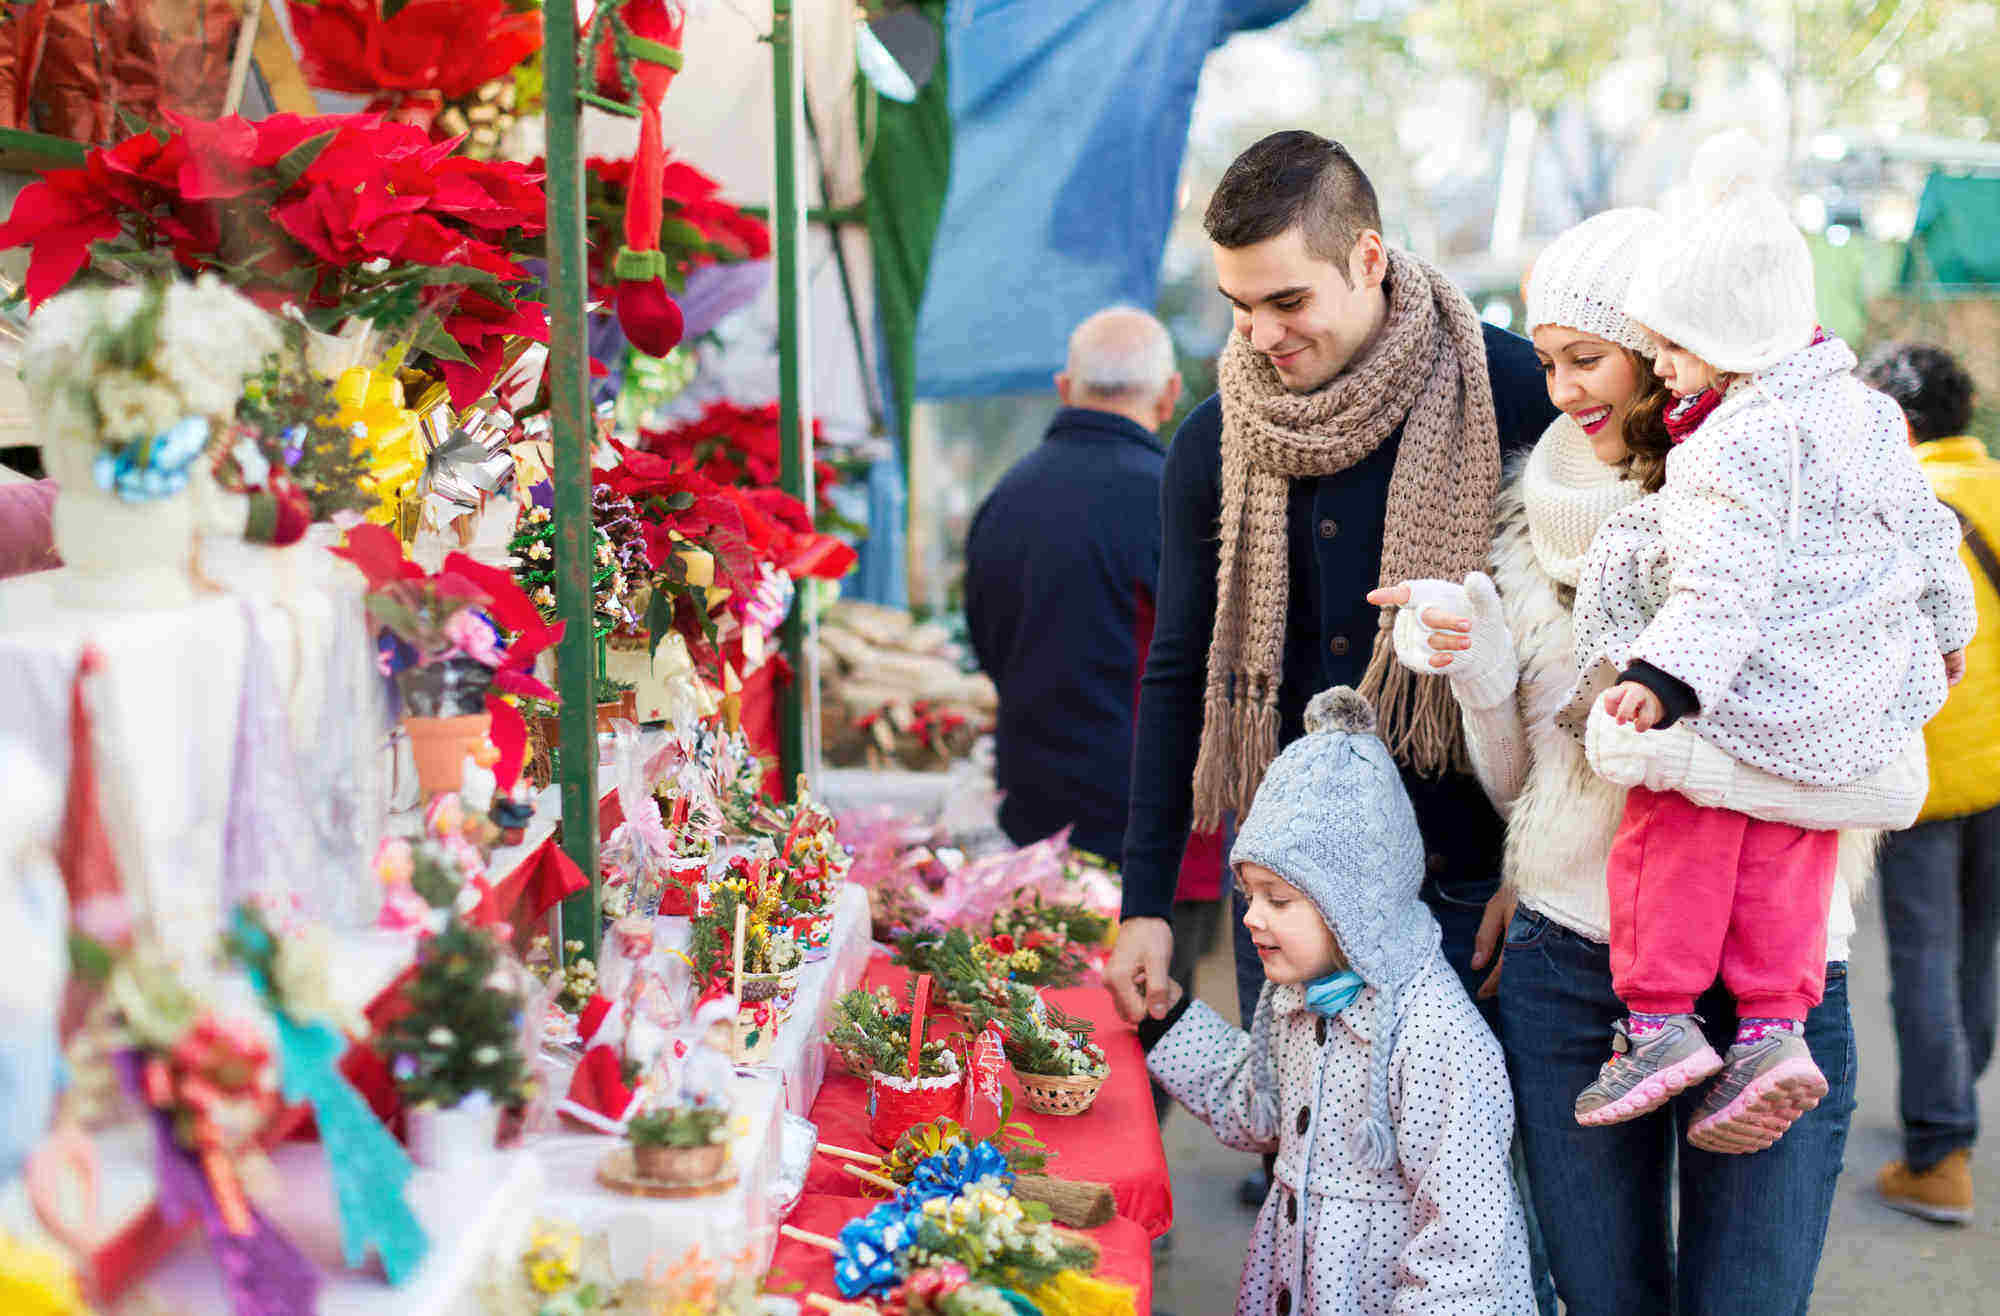 Smiling parents and little children buying red Euphorbia at Christmas fair. Focus on woman